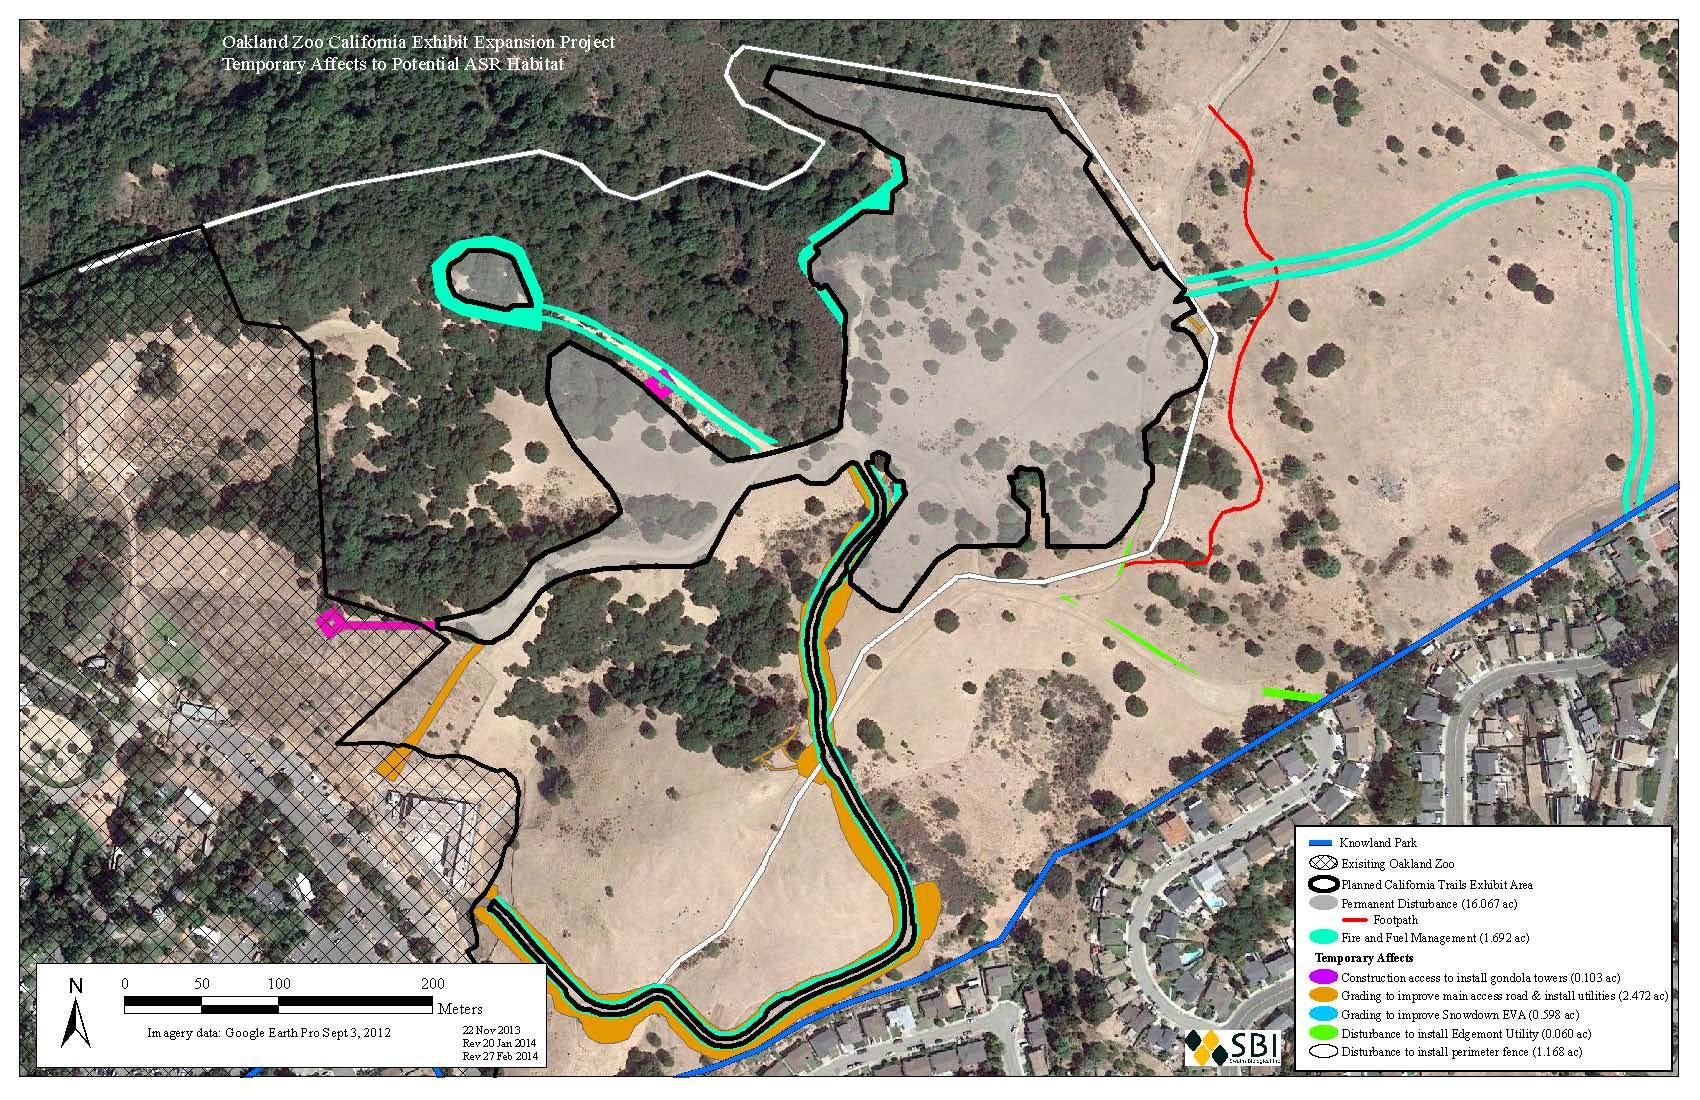 Sierra Club Expresses Serious Concerns About Zoo Expansion Location - Oakland Zoo California Trail Map